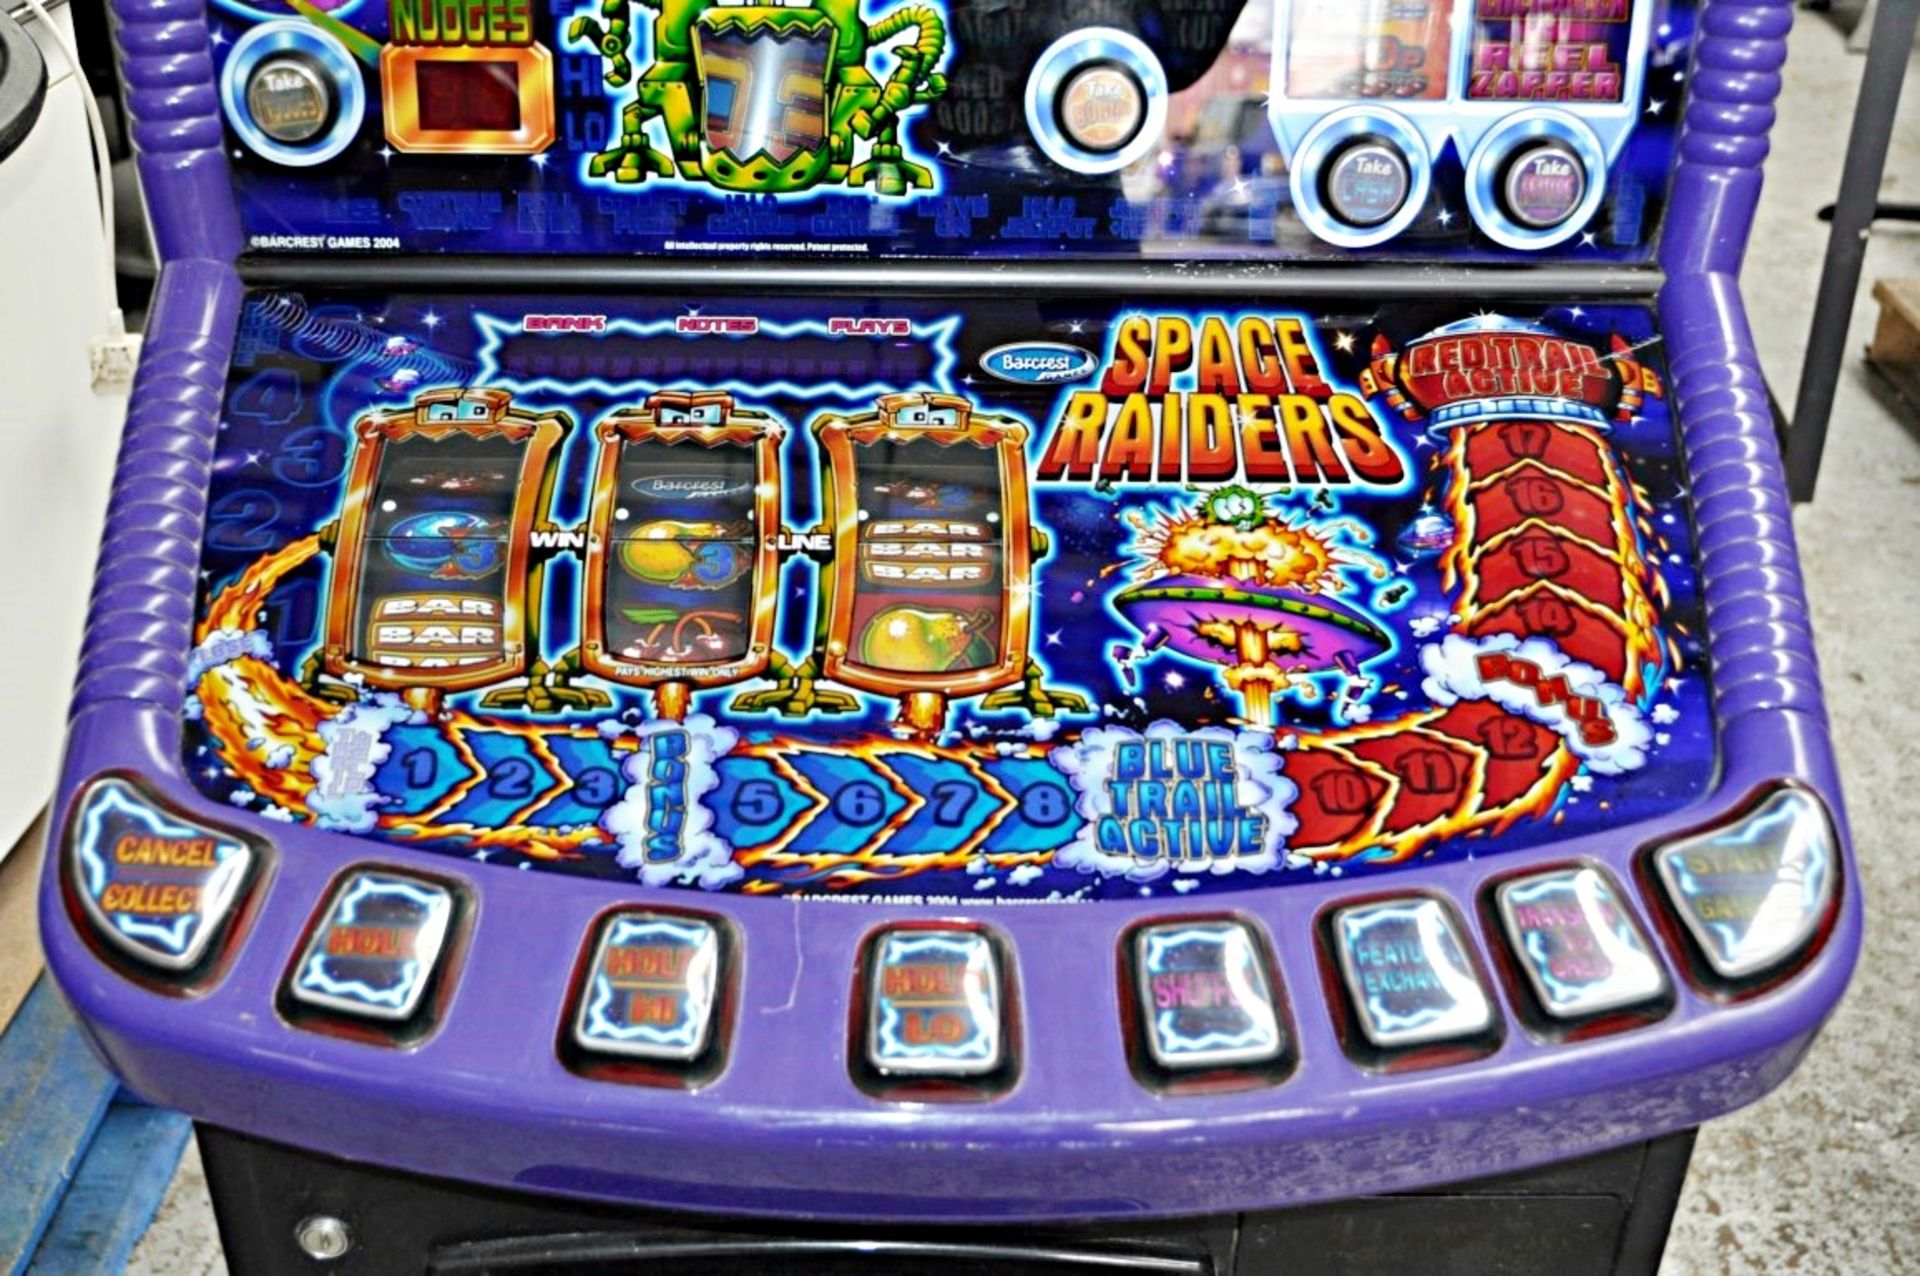 1 x "SPACE RAIDERS" Arcade Fruit Machine - Manufacturer: Barcrest (2004) - £5 + Repeat-Chance - Image 3 of 3